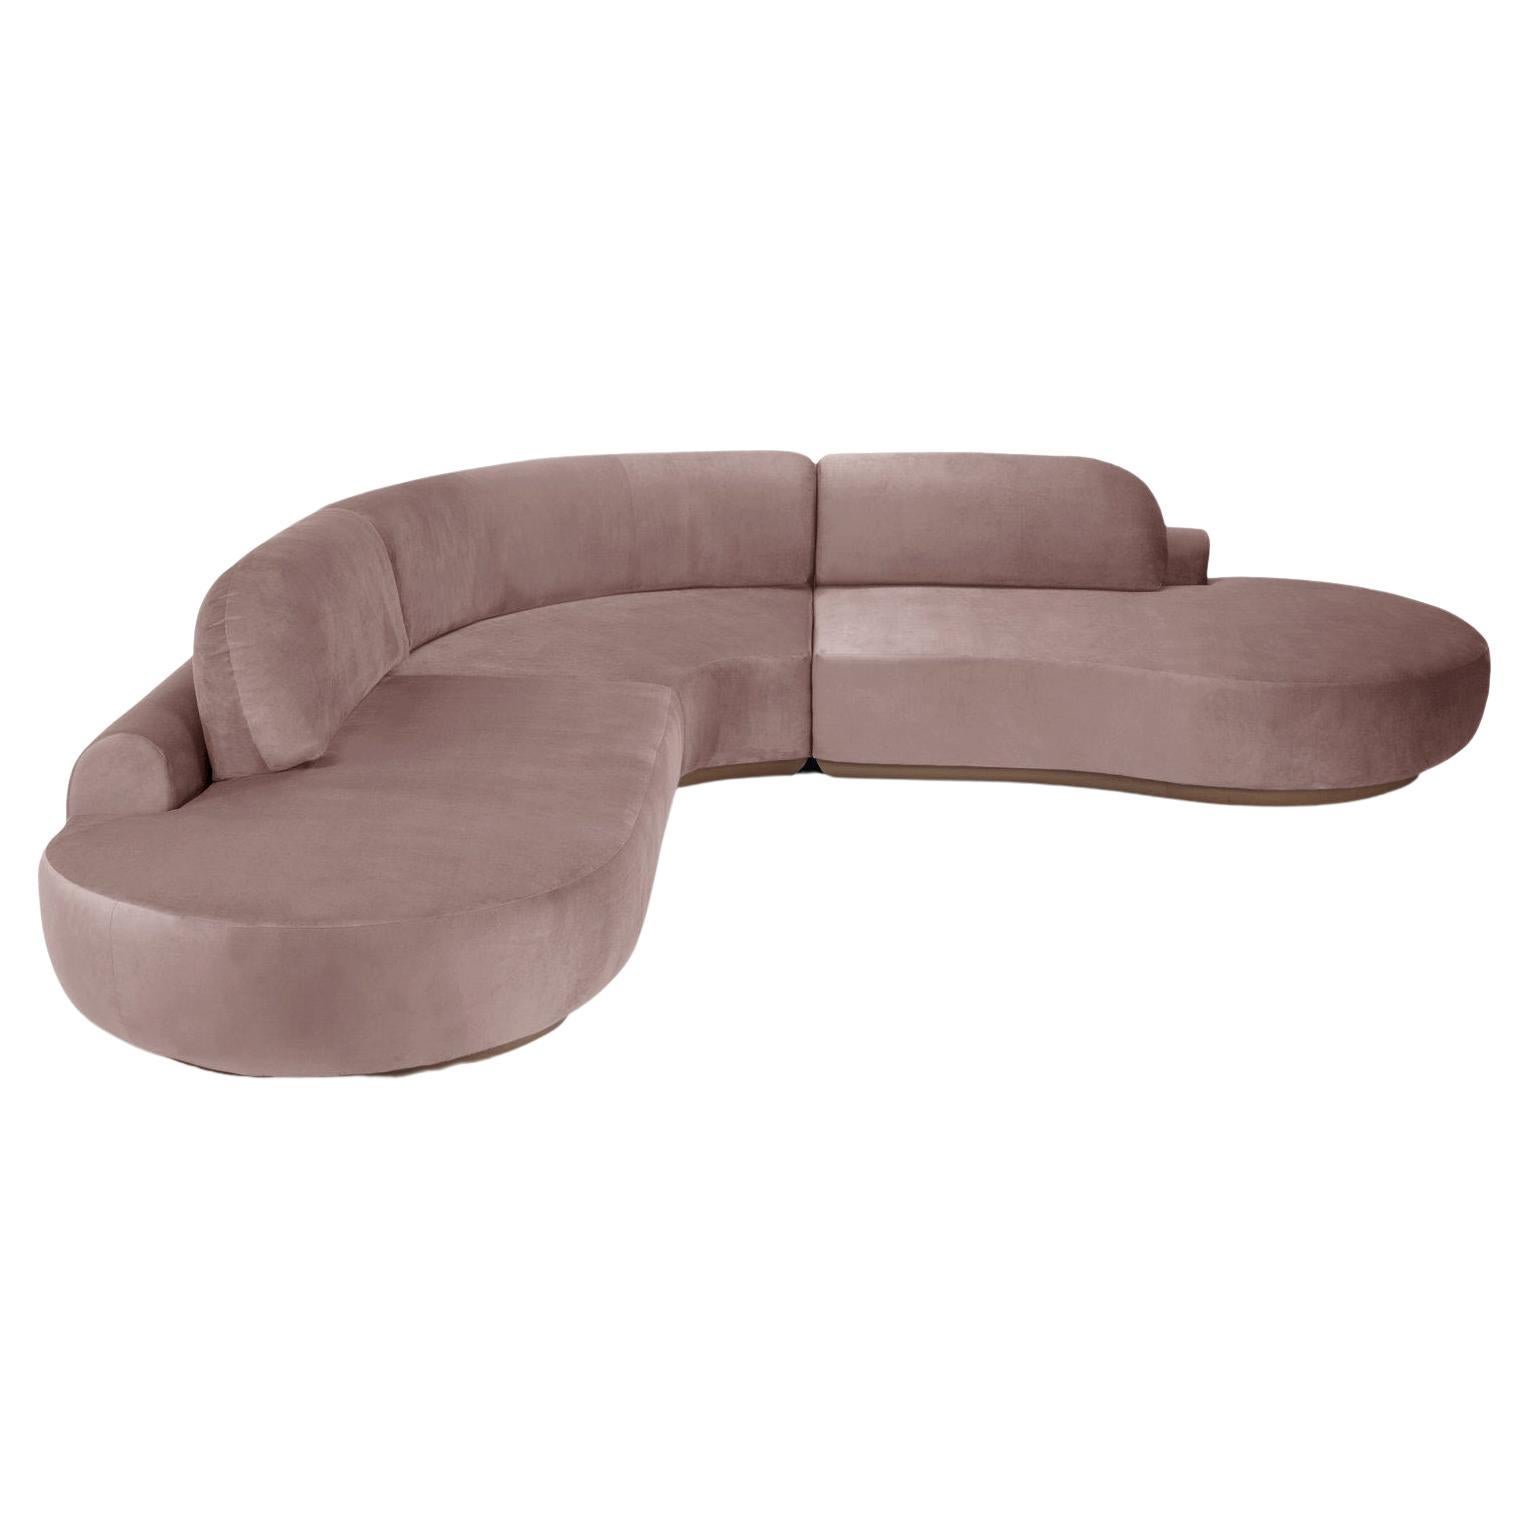 Naked Curved Sectional Sofa, 3 Piece with Beech Ash-056-1 and Barcelona Lotus For Sale